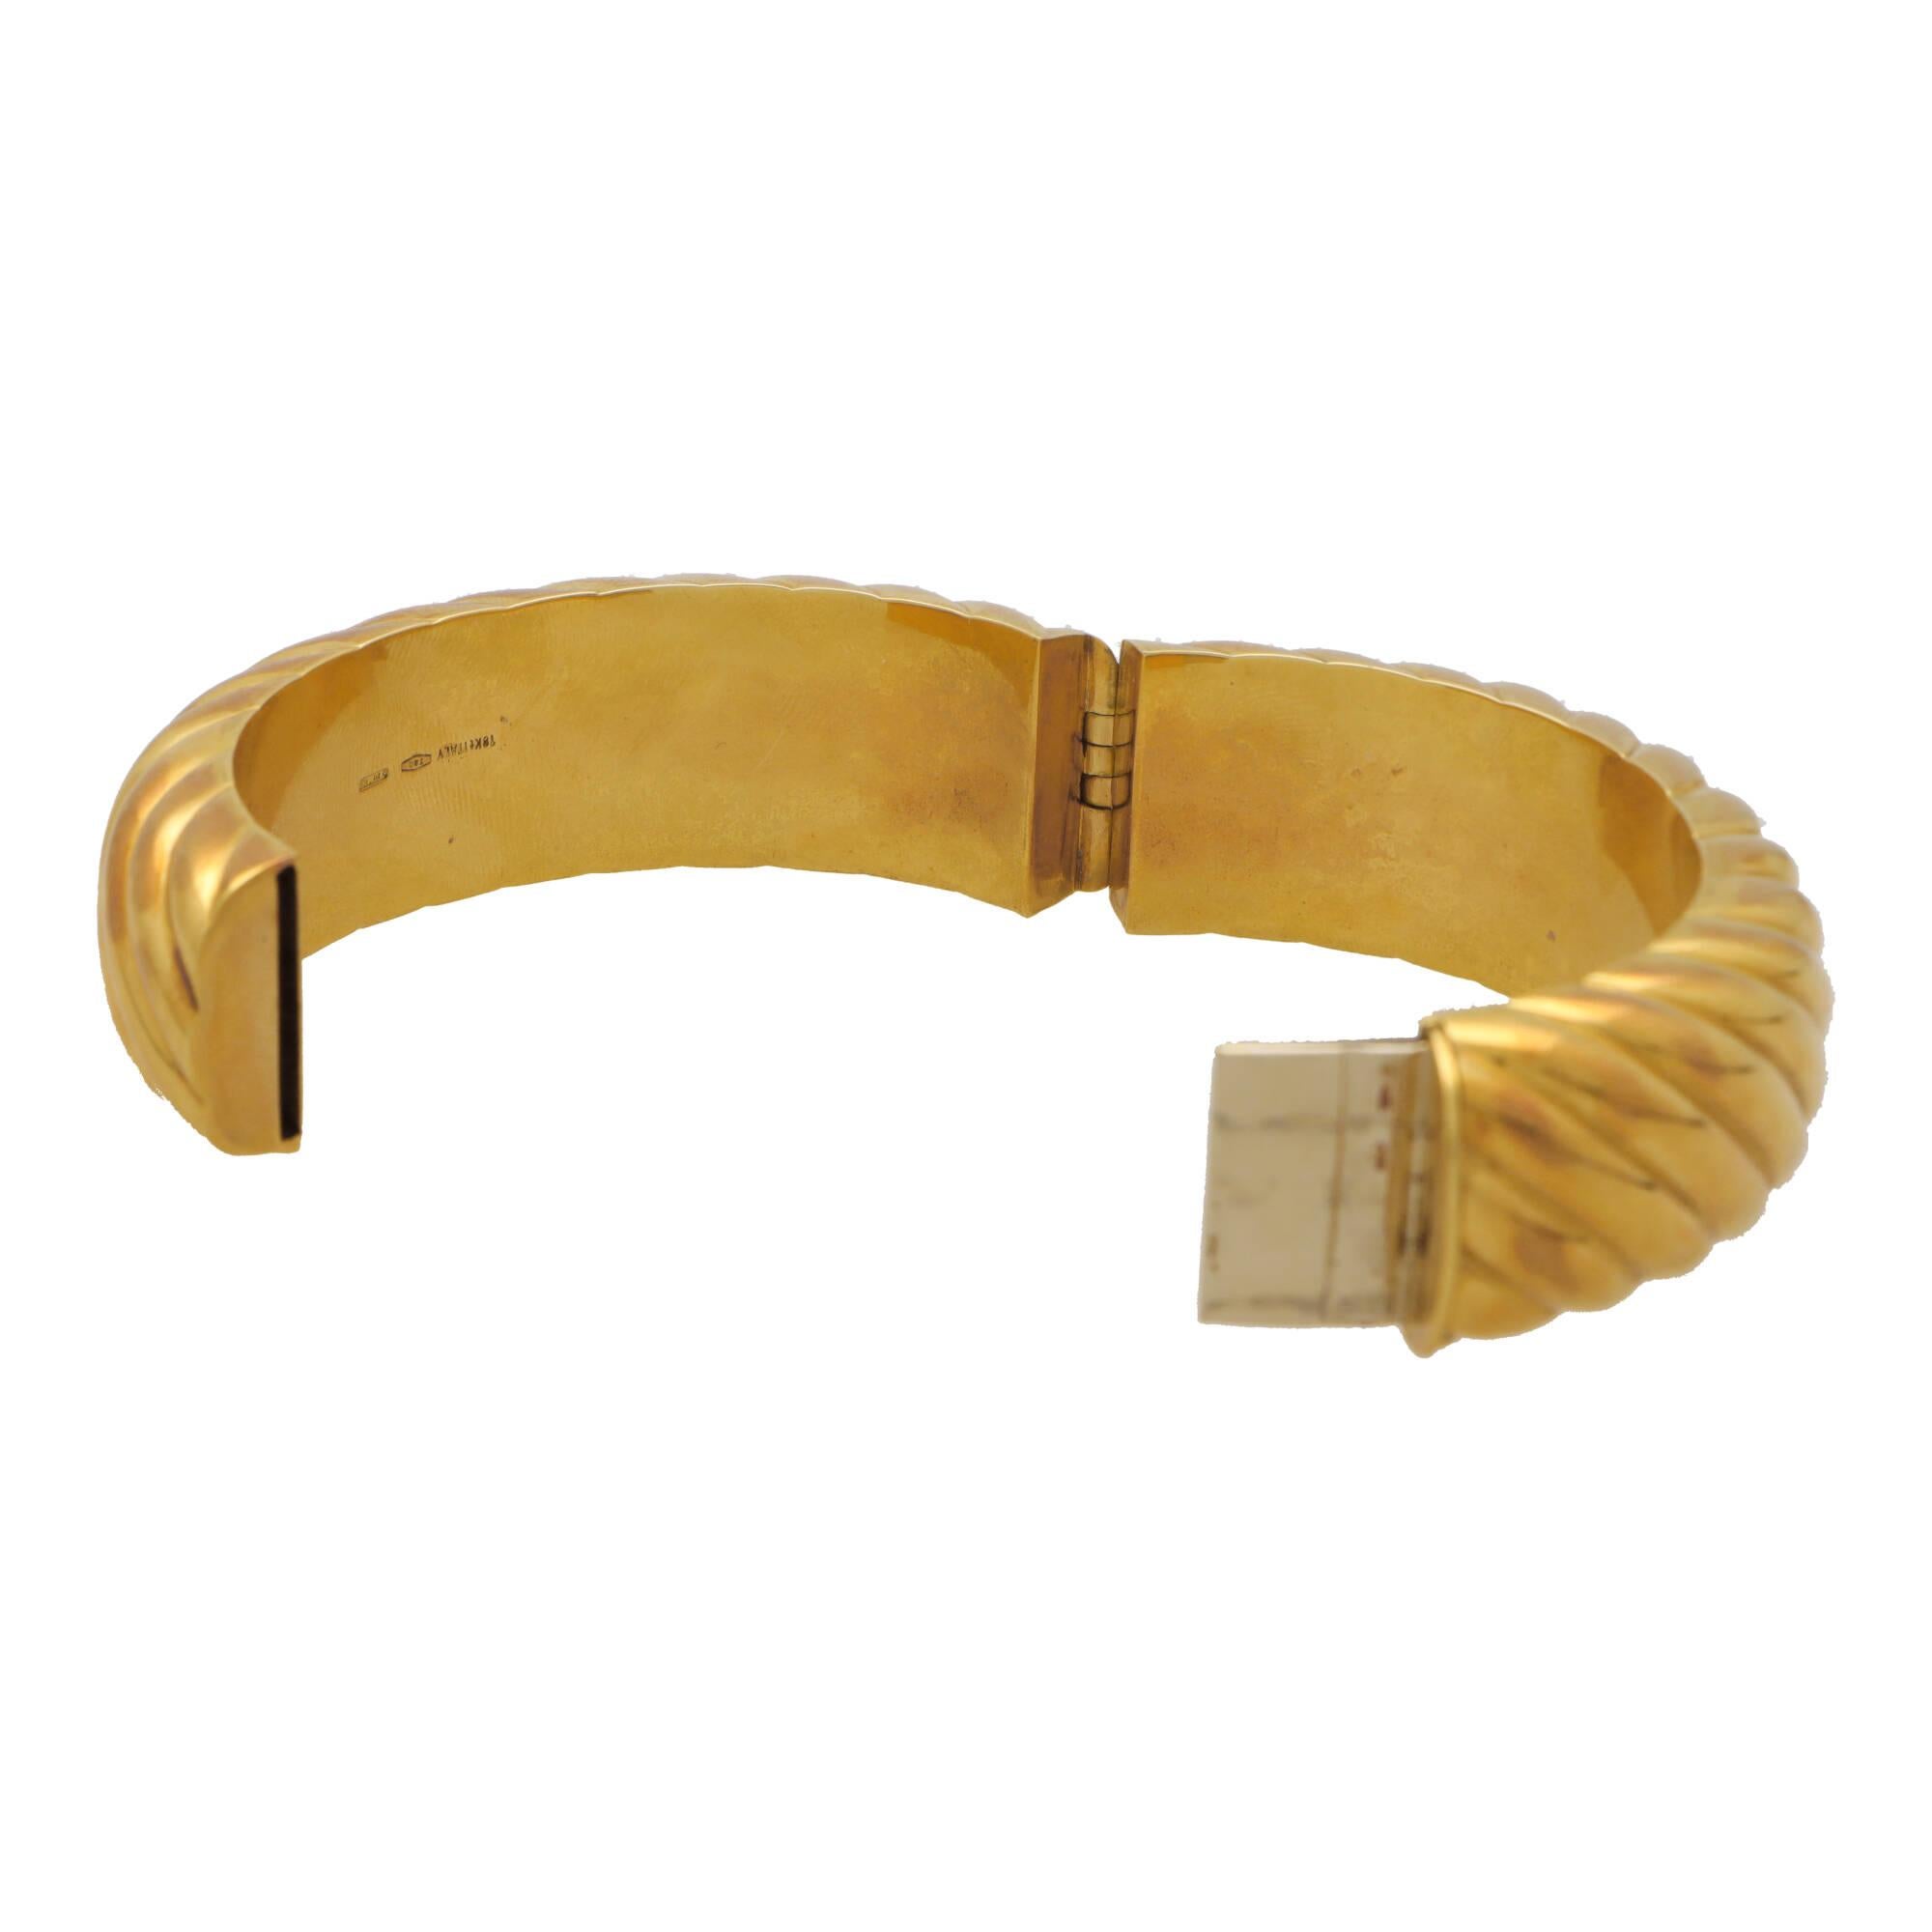 An extremely stylish vintage 1980’s Italian chunky hinged bangle set in 18k yellow gold.

The bangle is composed in an iconic 1980’s chunky design with ribbed detailing travelling throughout. The bangle is on a hinged fitting with a hidden push